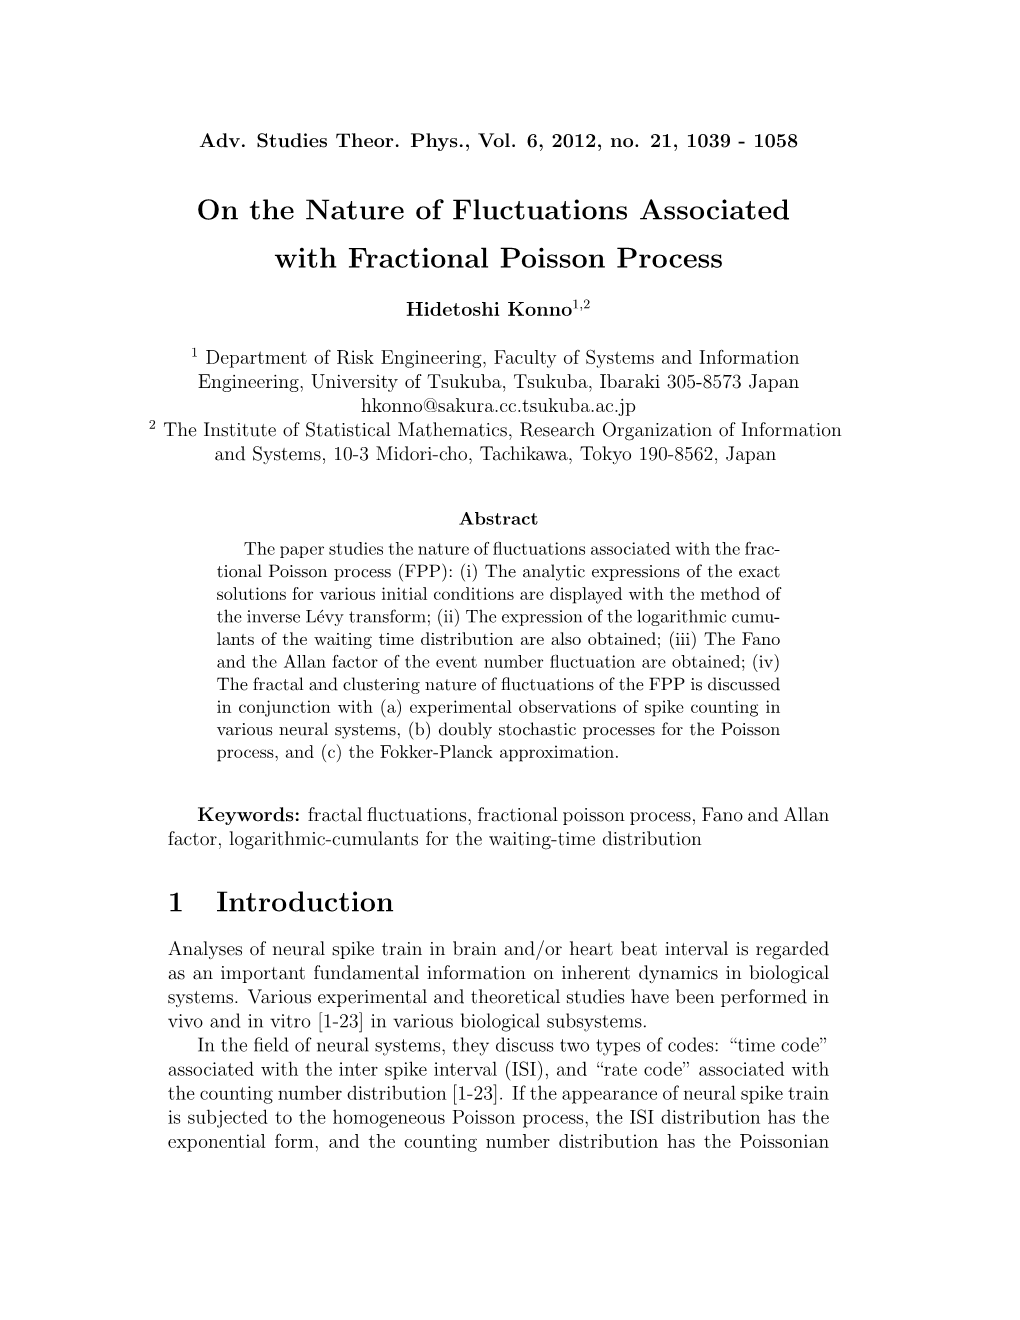 On the Nature of Fluctuations Associated with Fractional Poisson Process